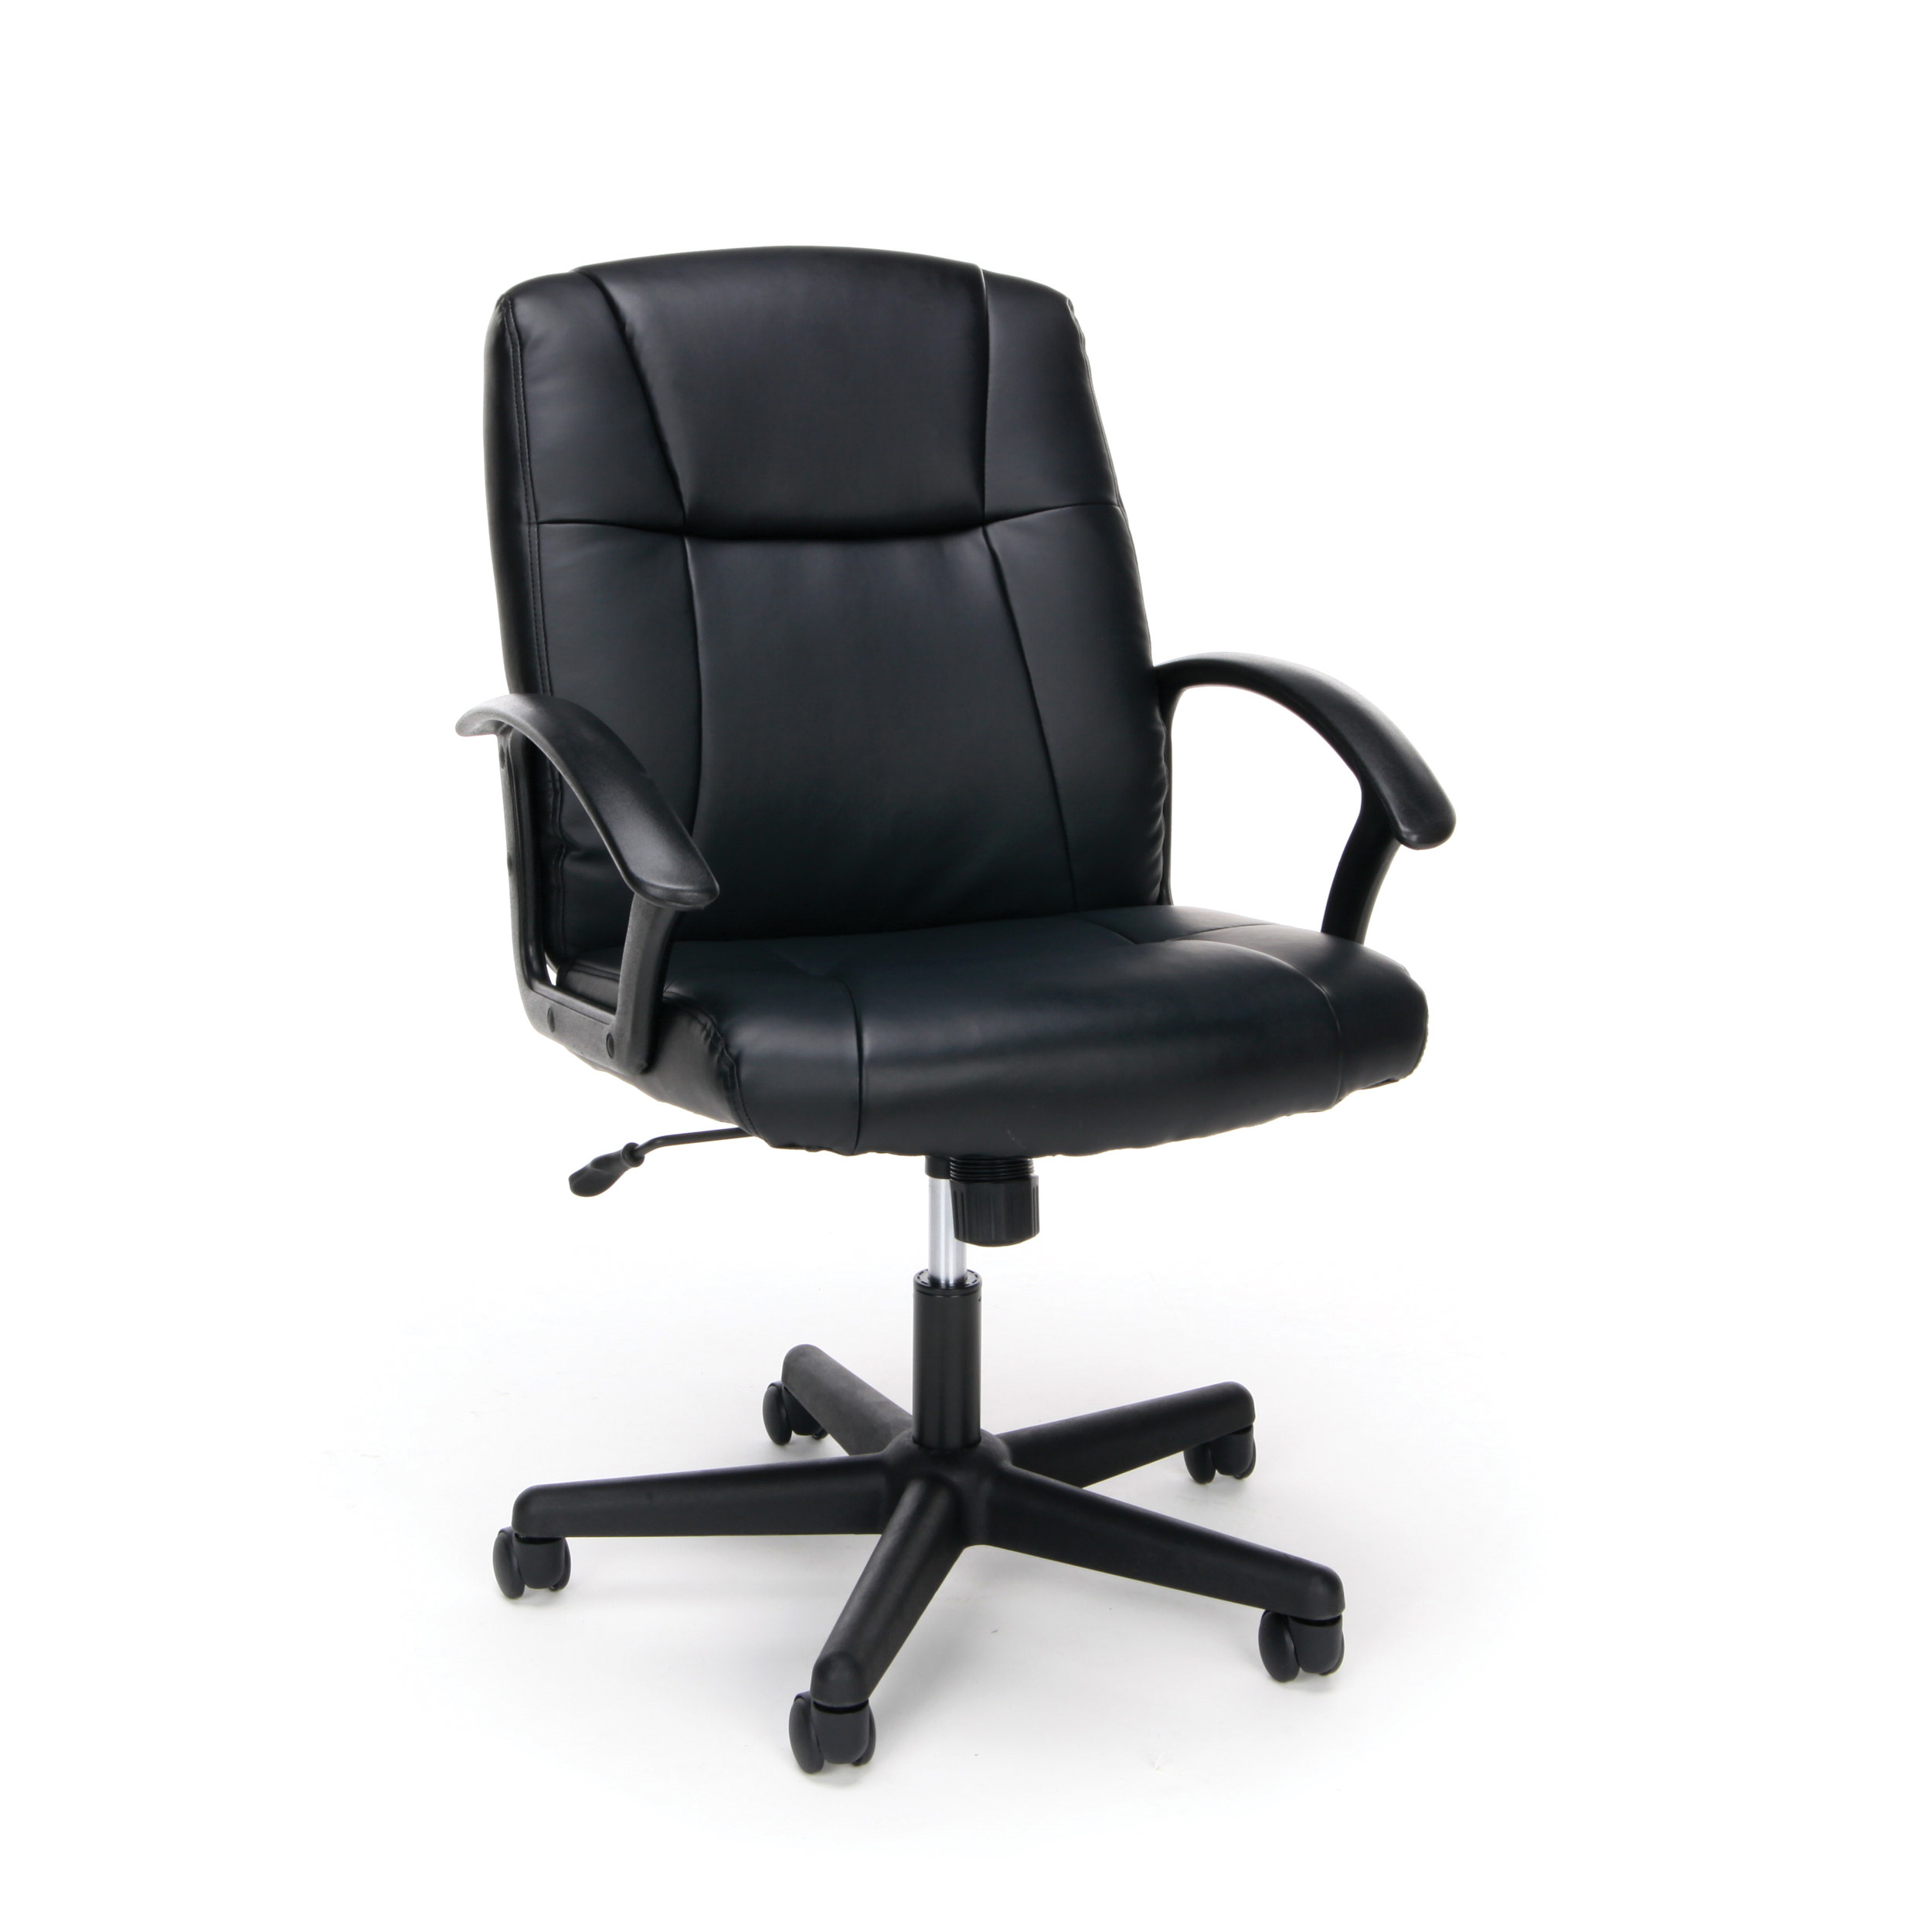 A black wheeled, revolving office chair that is height adjustable 